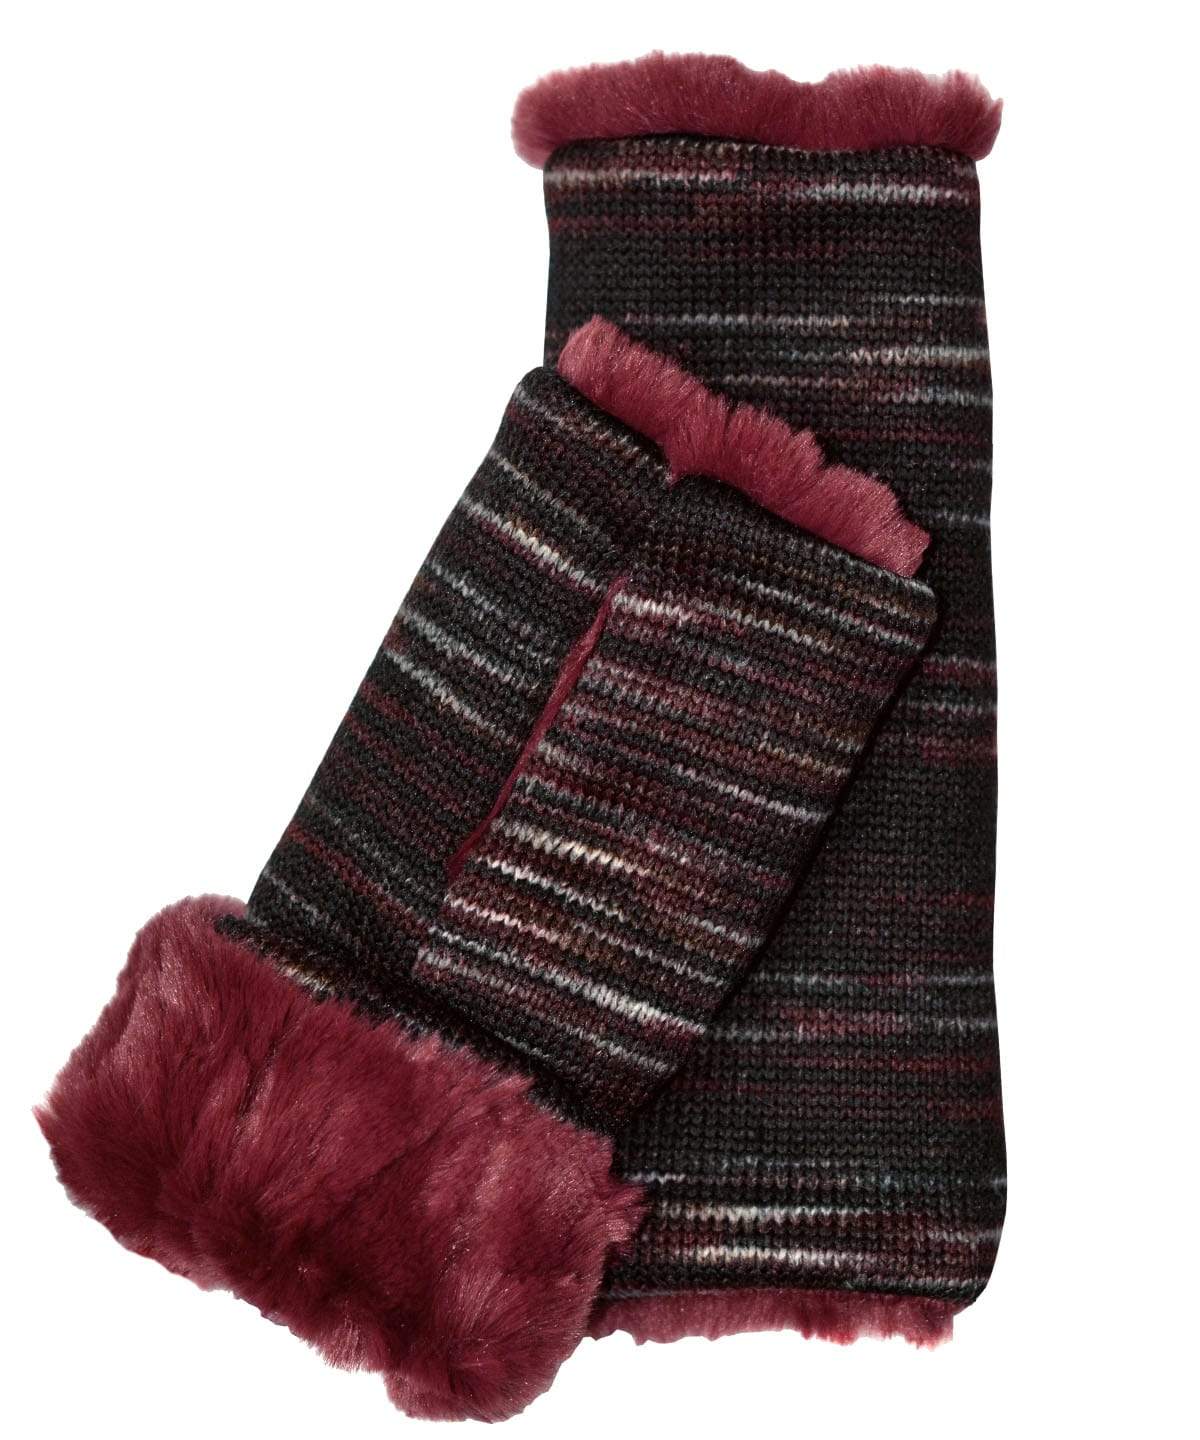 Reversible Fingerless Gloves | Sweet Stripes in Cherry Cordial with Cranberry Creek Faux Fur Lining | Pandemonium Millinery